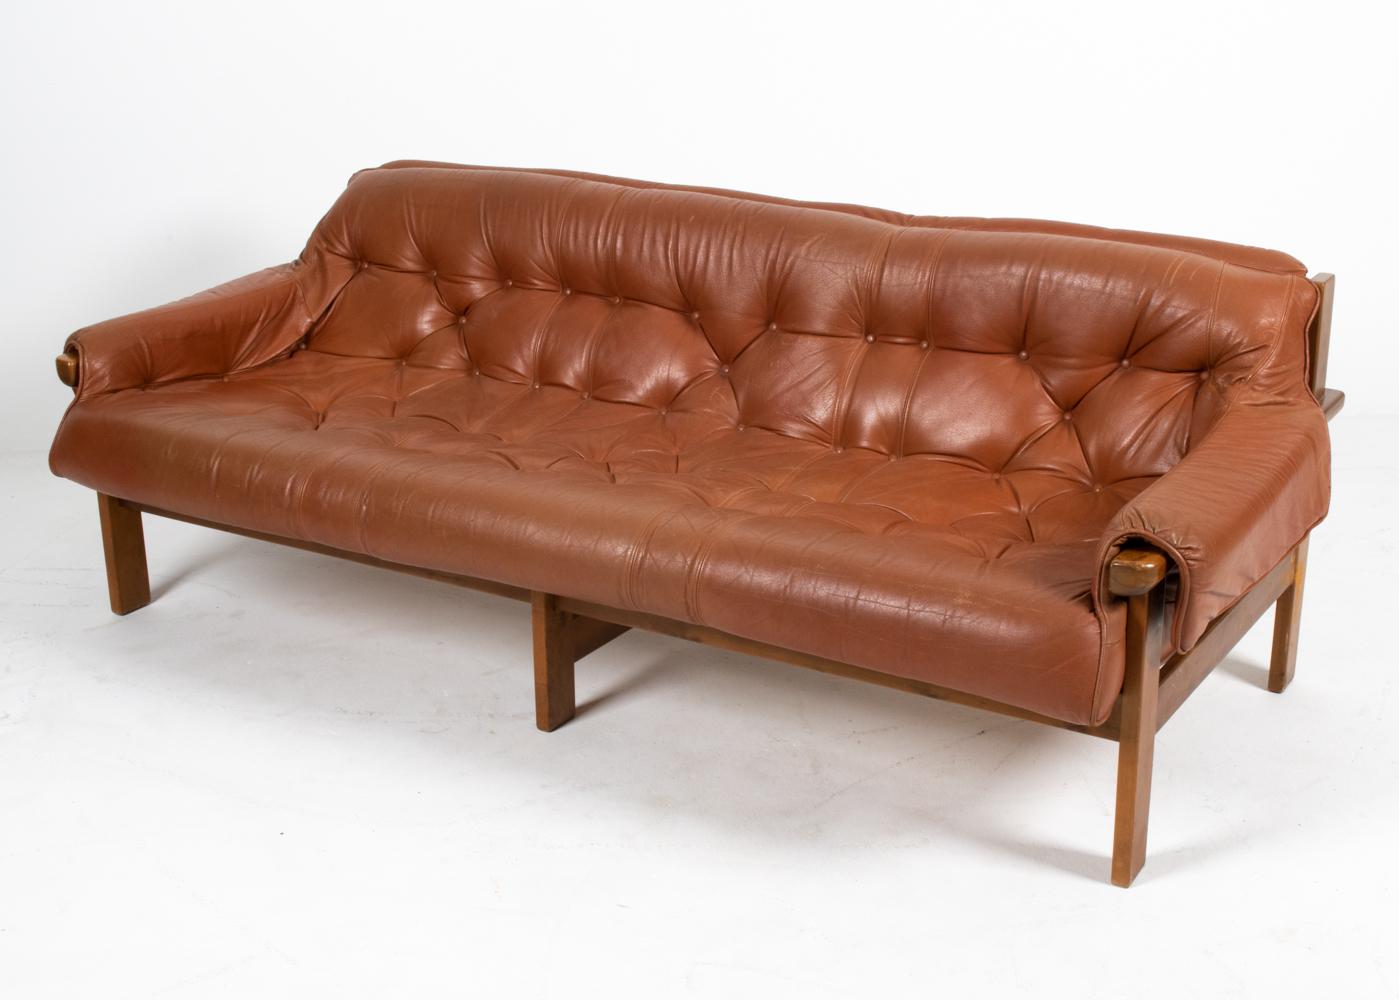 This fabulous sofa in the Brazilian Modernist style features a tufted cushion of brandy-colored bonded leather and a chunky solid wood frame. Though it is unsigned, the design is similar to that of Percival Lafer's MP-41 series. 

As one of the